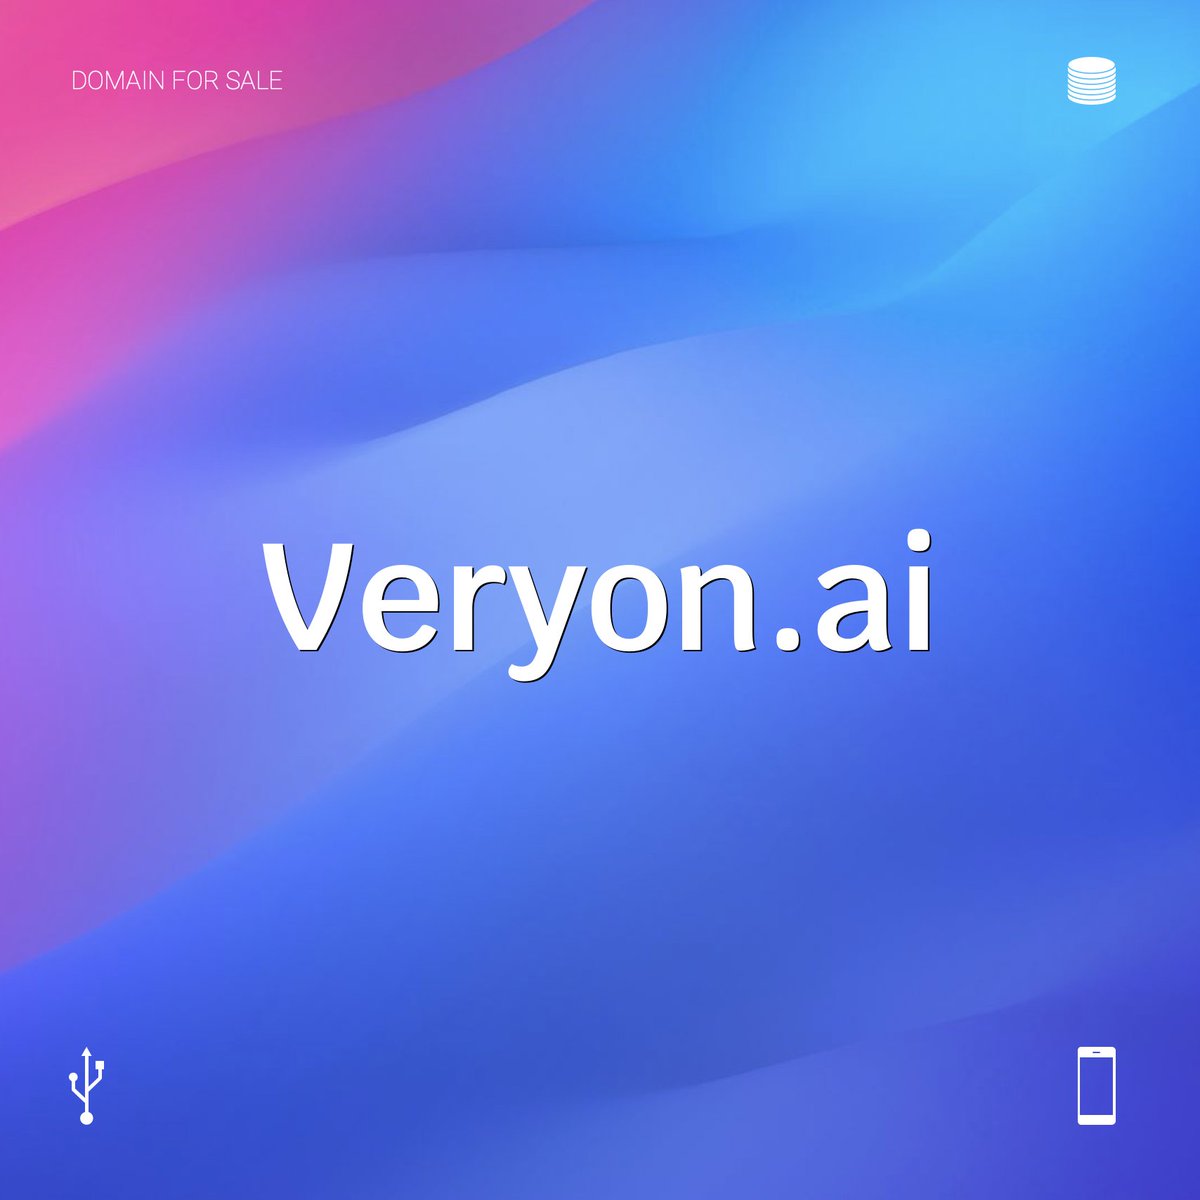 🌐  Veryon.ai 
⭐️  ꜰᴏʀ ꜱᴀʟᴇ

#domais #domainnames #AI #very #veri #VeryMuch #OnlineSafety #Connections #connectivity #MobileLegends #MobileGame #MobileAI #geolocation #geometric #VectorSearch #GenAI #LLMs #startups #investorawareness
__